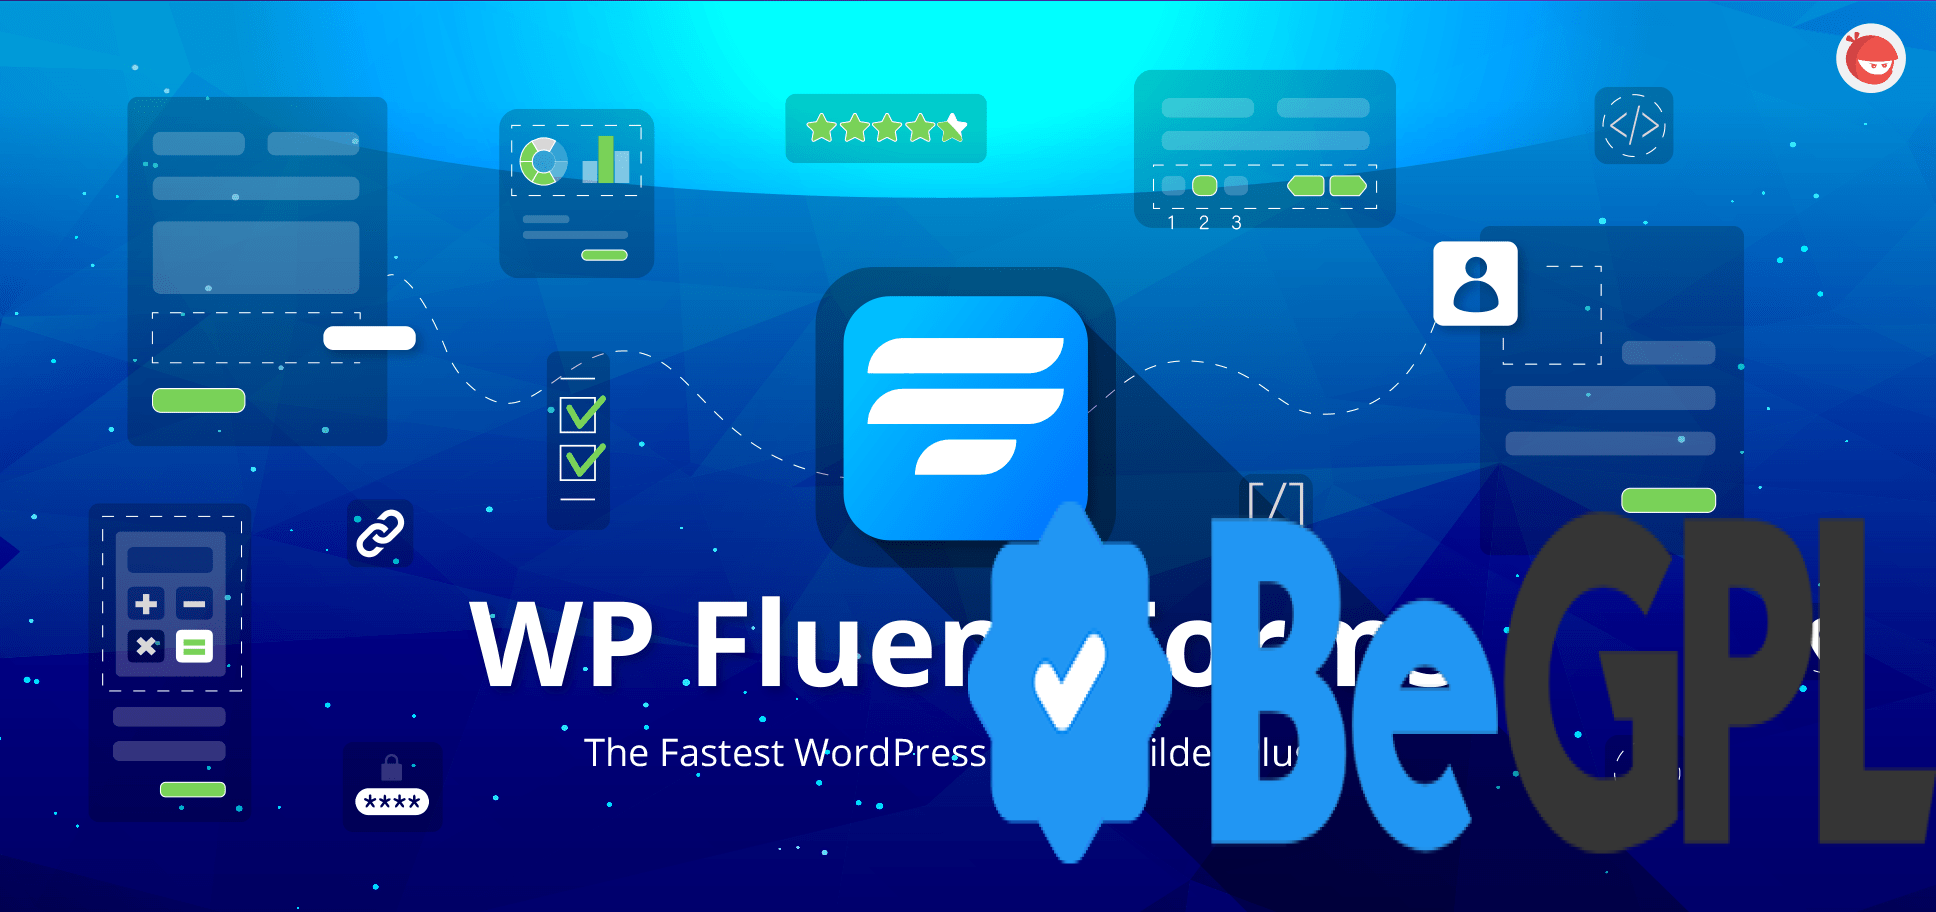 Supercharge your WordPress forms with WP Fluent Forms Pro 4.3.23 - GPL Download. Effortlessly create stunning forms, integrate with third-party tools, and unlock advanced features. Get it now.